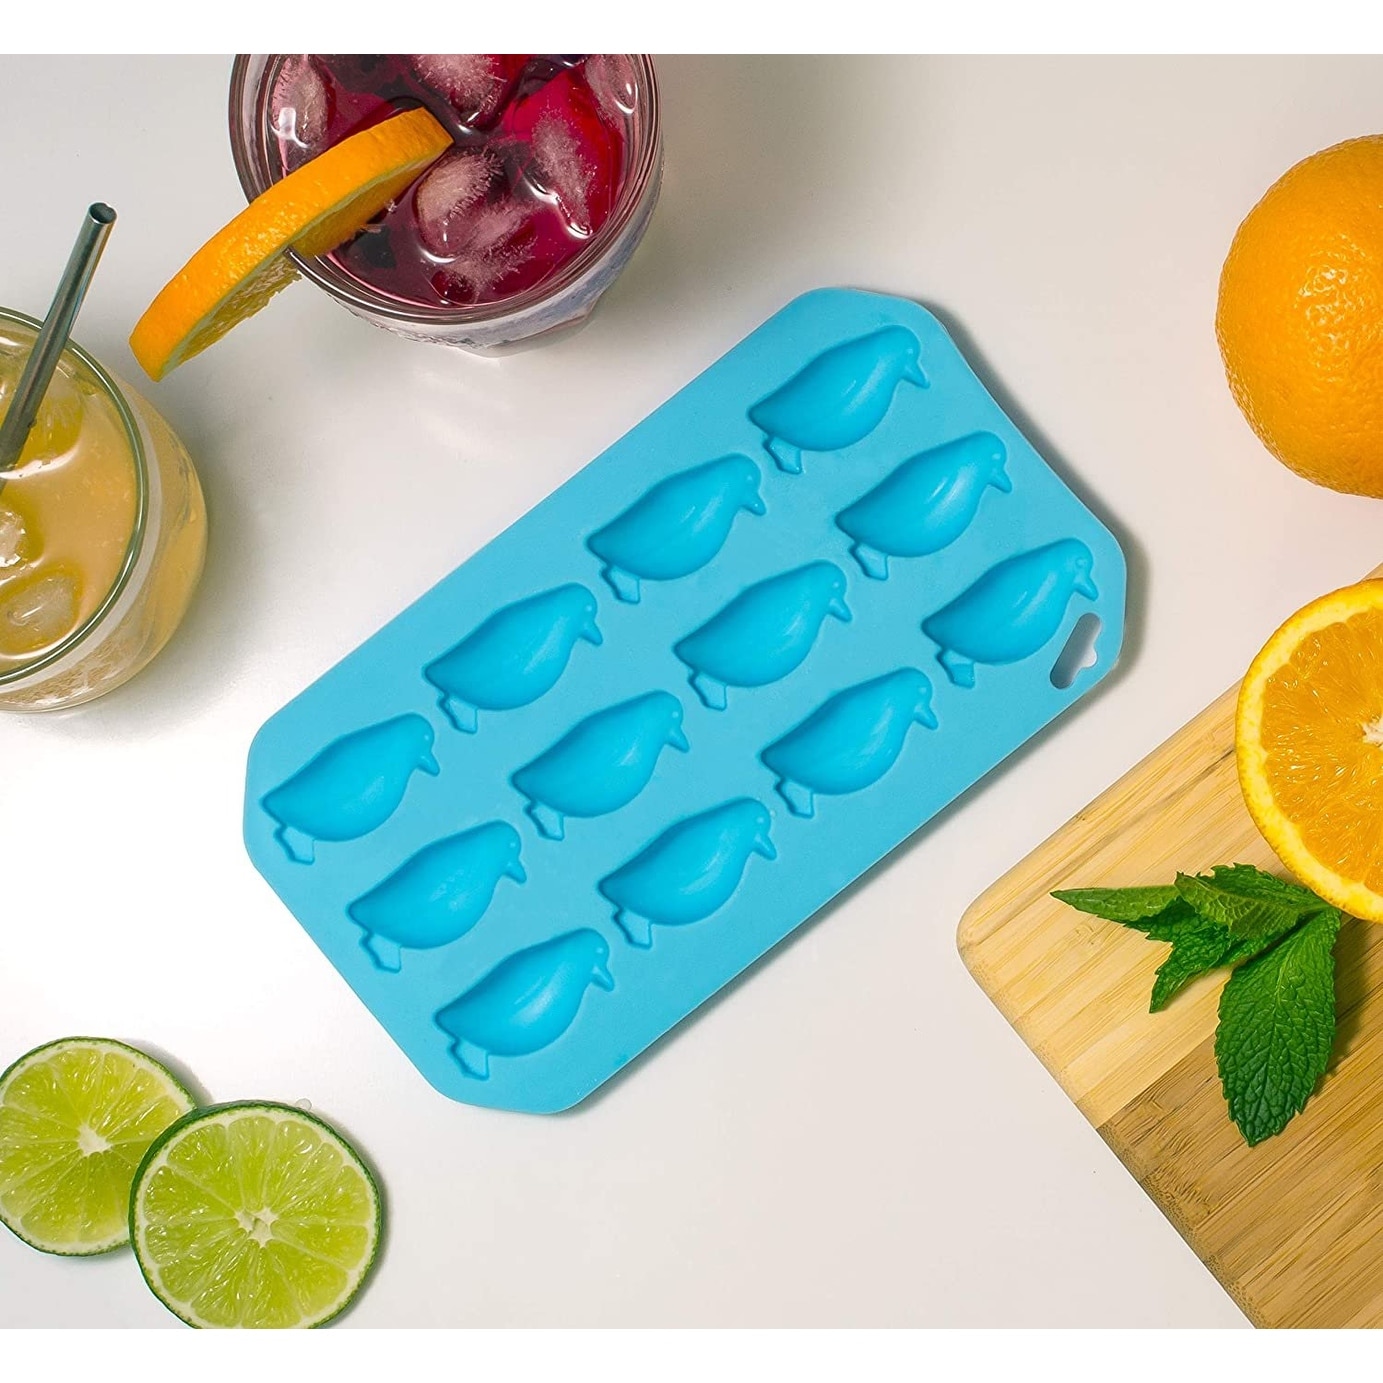 https://ak1.ostkcdn.com/images/products/is/images/direct/3a55f5fc3c110bc1a93691bc916f5d7ee532567a/HIC-Blue-Silicone-Penguin-Shape-Ice-Cube-Tray-and-Baking-Mold---Makes-12-Cubes.jpg